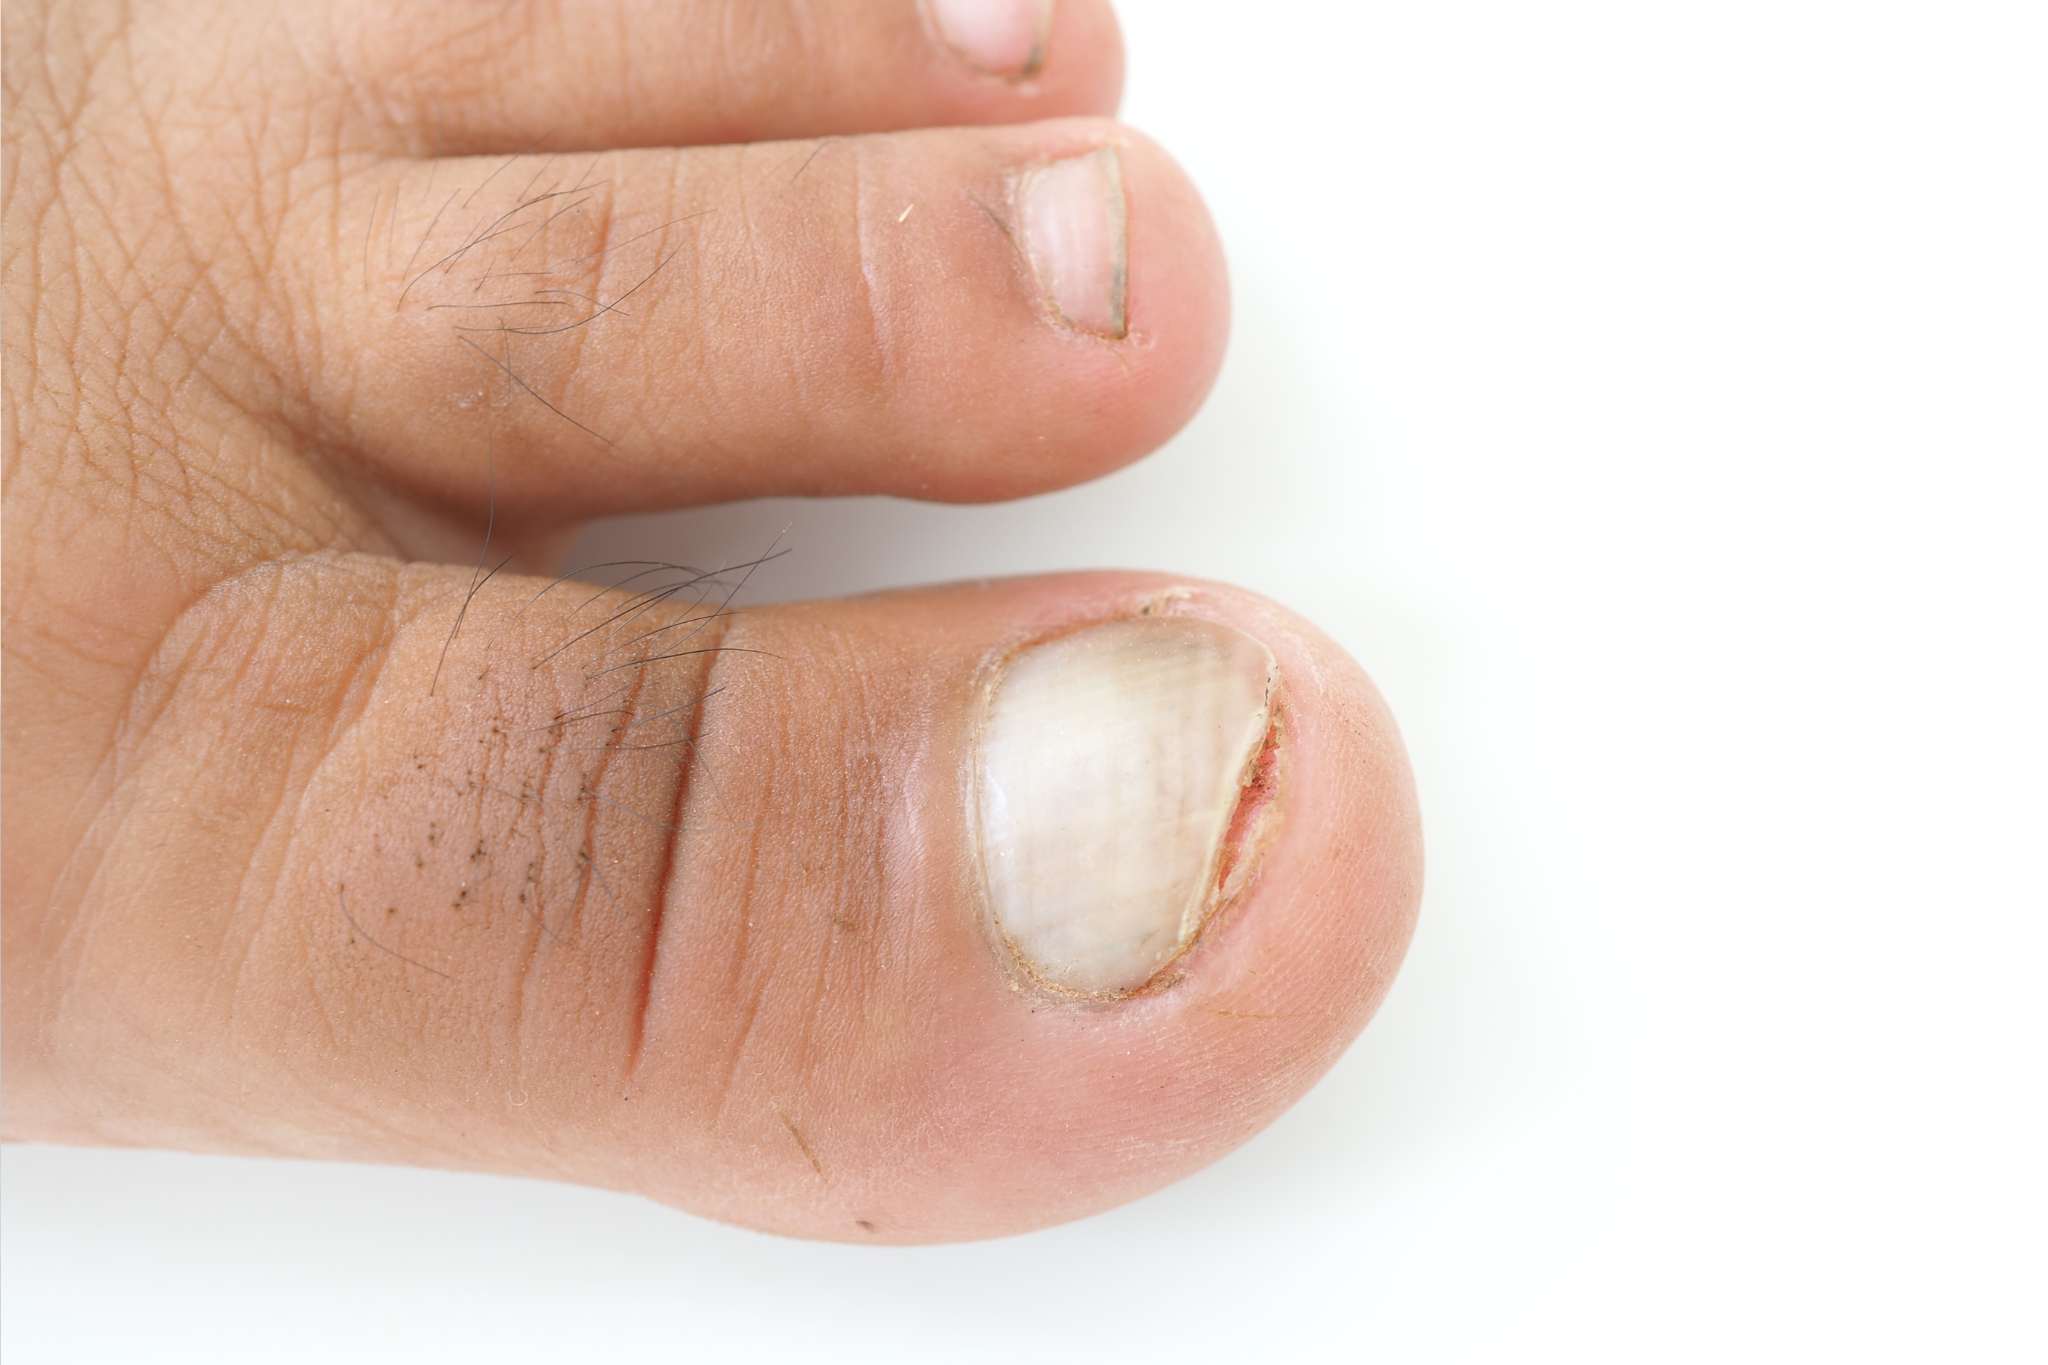 Crooked toenails with ingrown